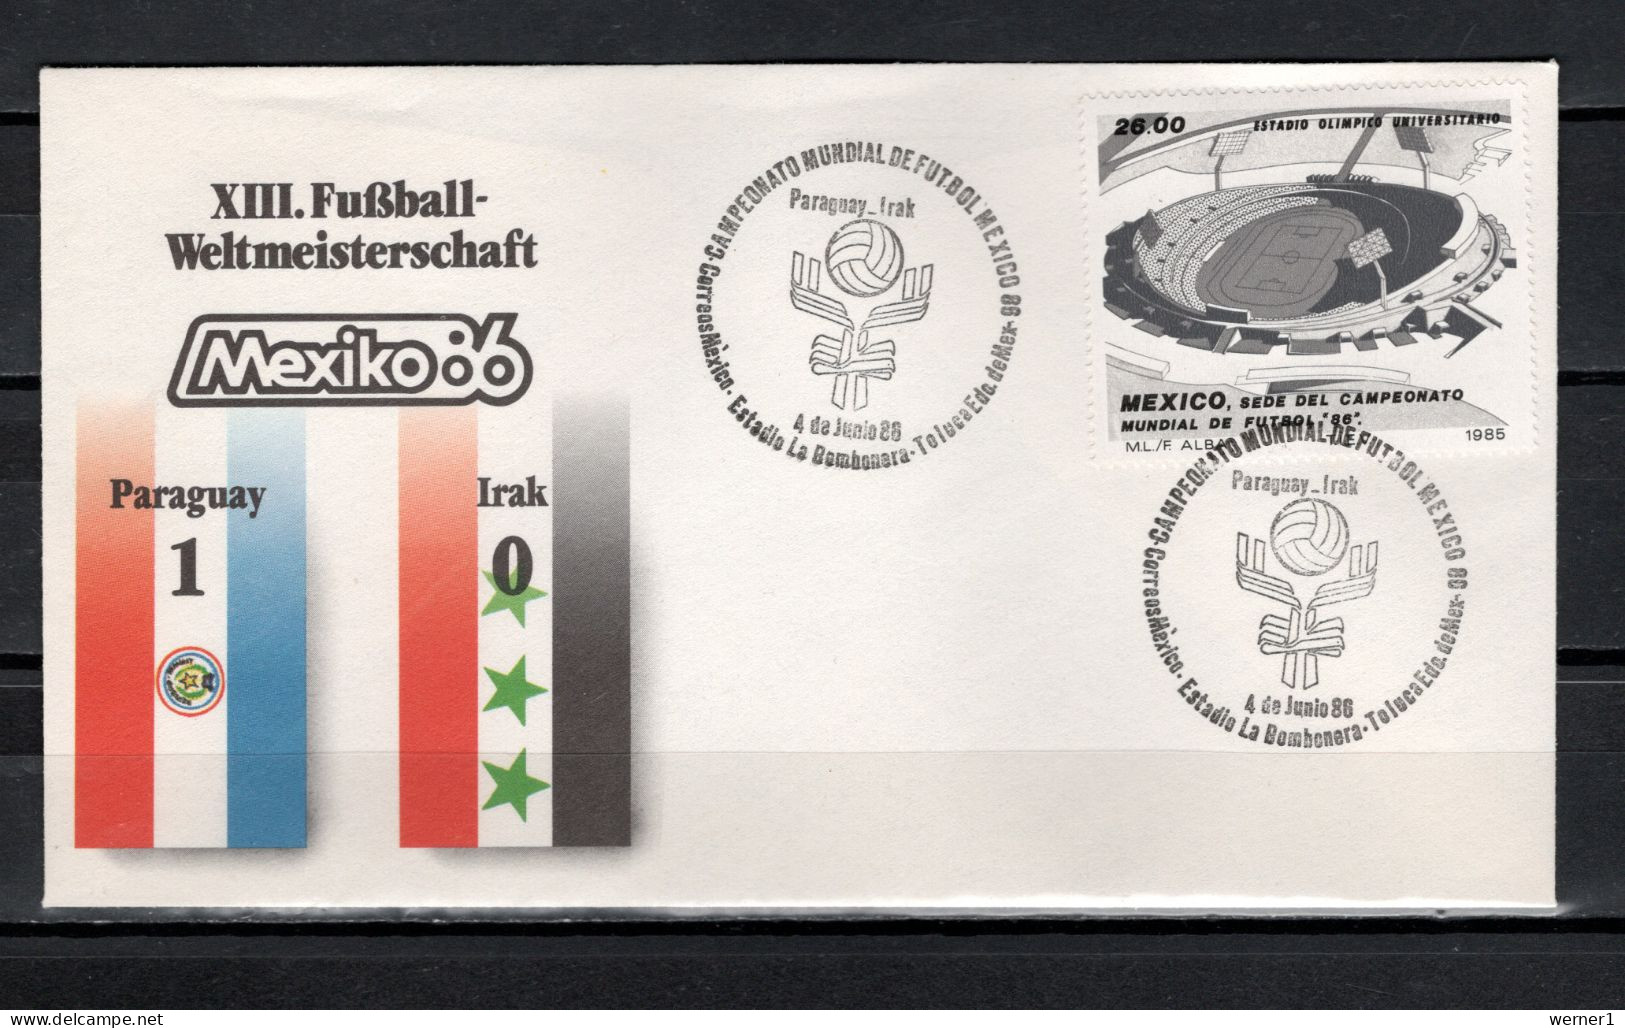 Mexico 1986 Football Soccer World Cup Commemorative Cover Match Paraguay - Iraq 1 : 0 - 1986 – Messico